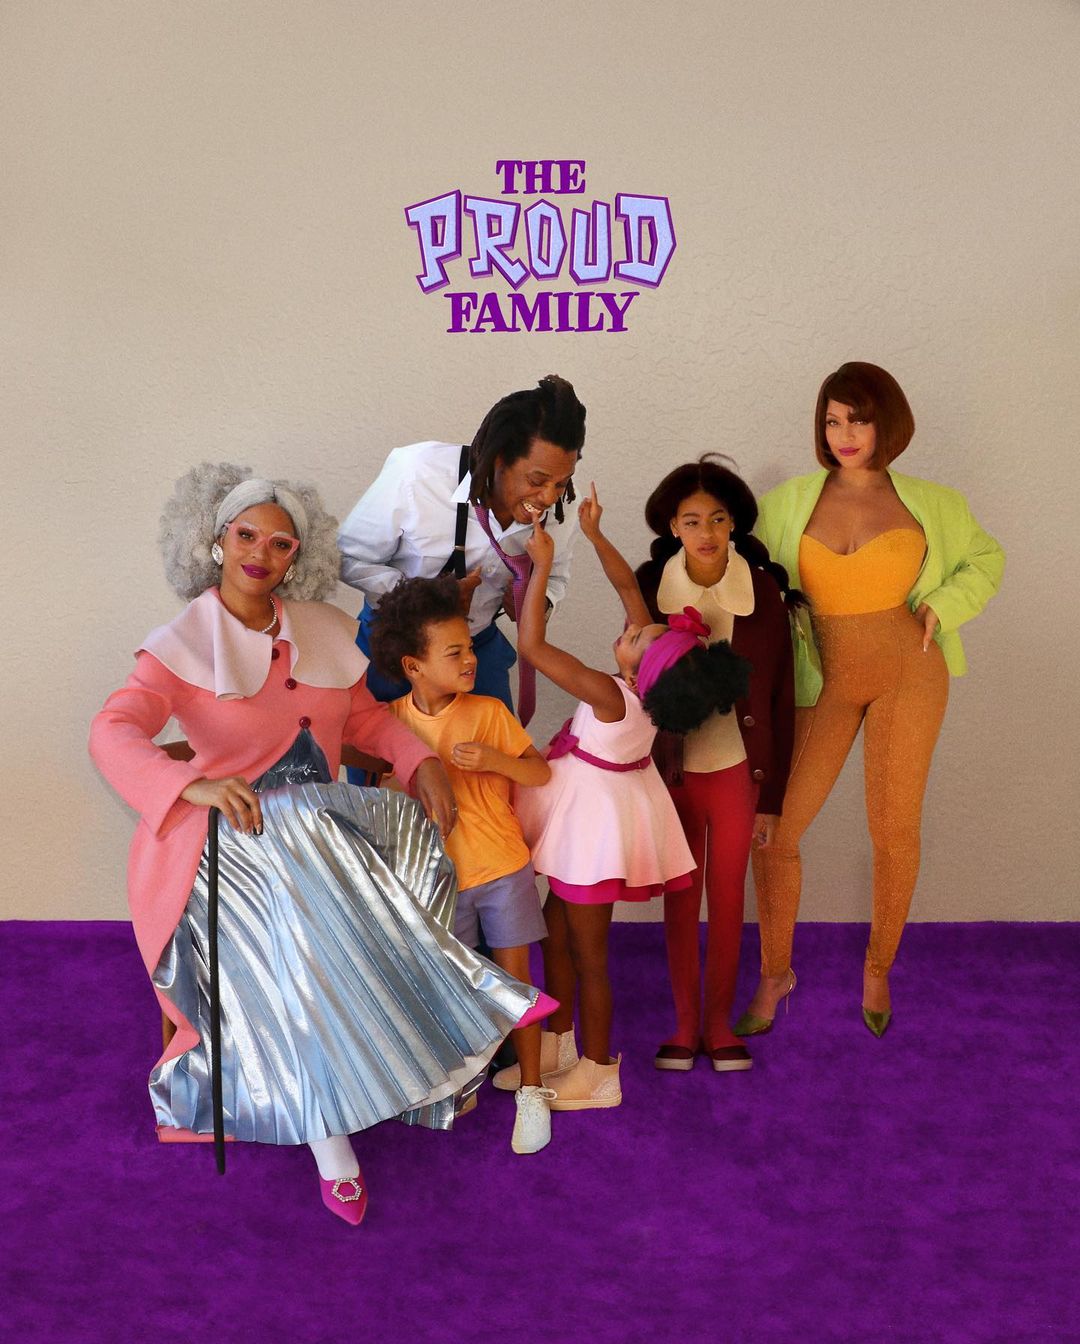 Beyoncé, JAY-Z & the Kids transform into "The Proud Family" for ...